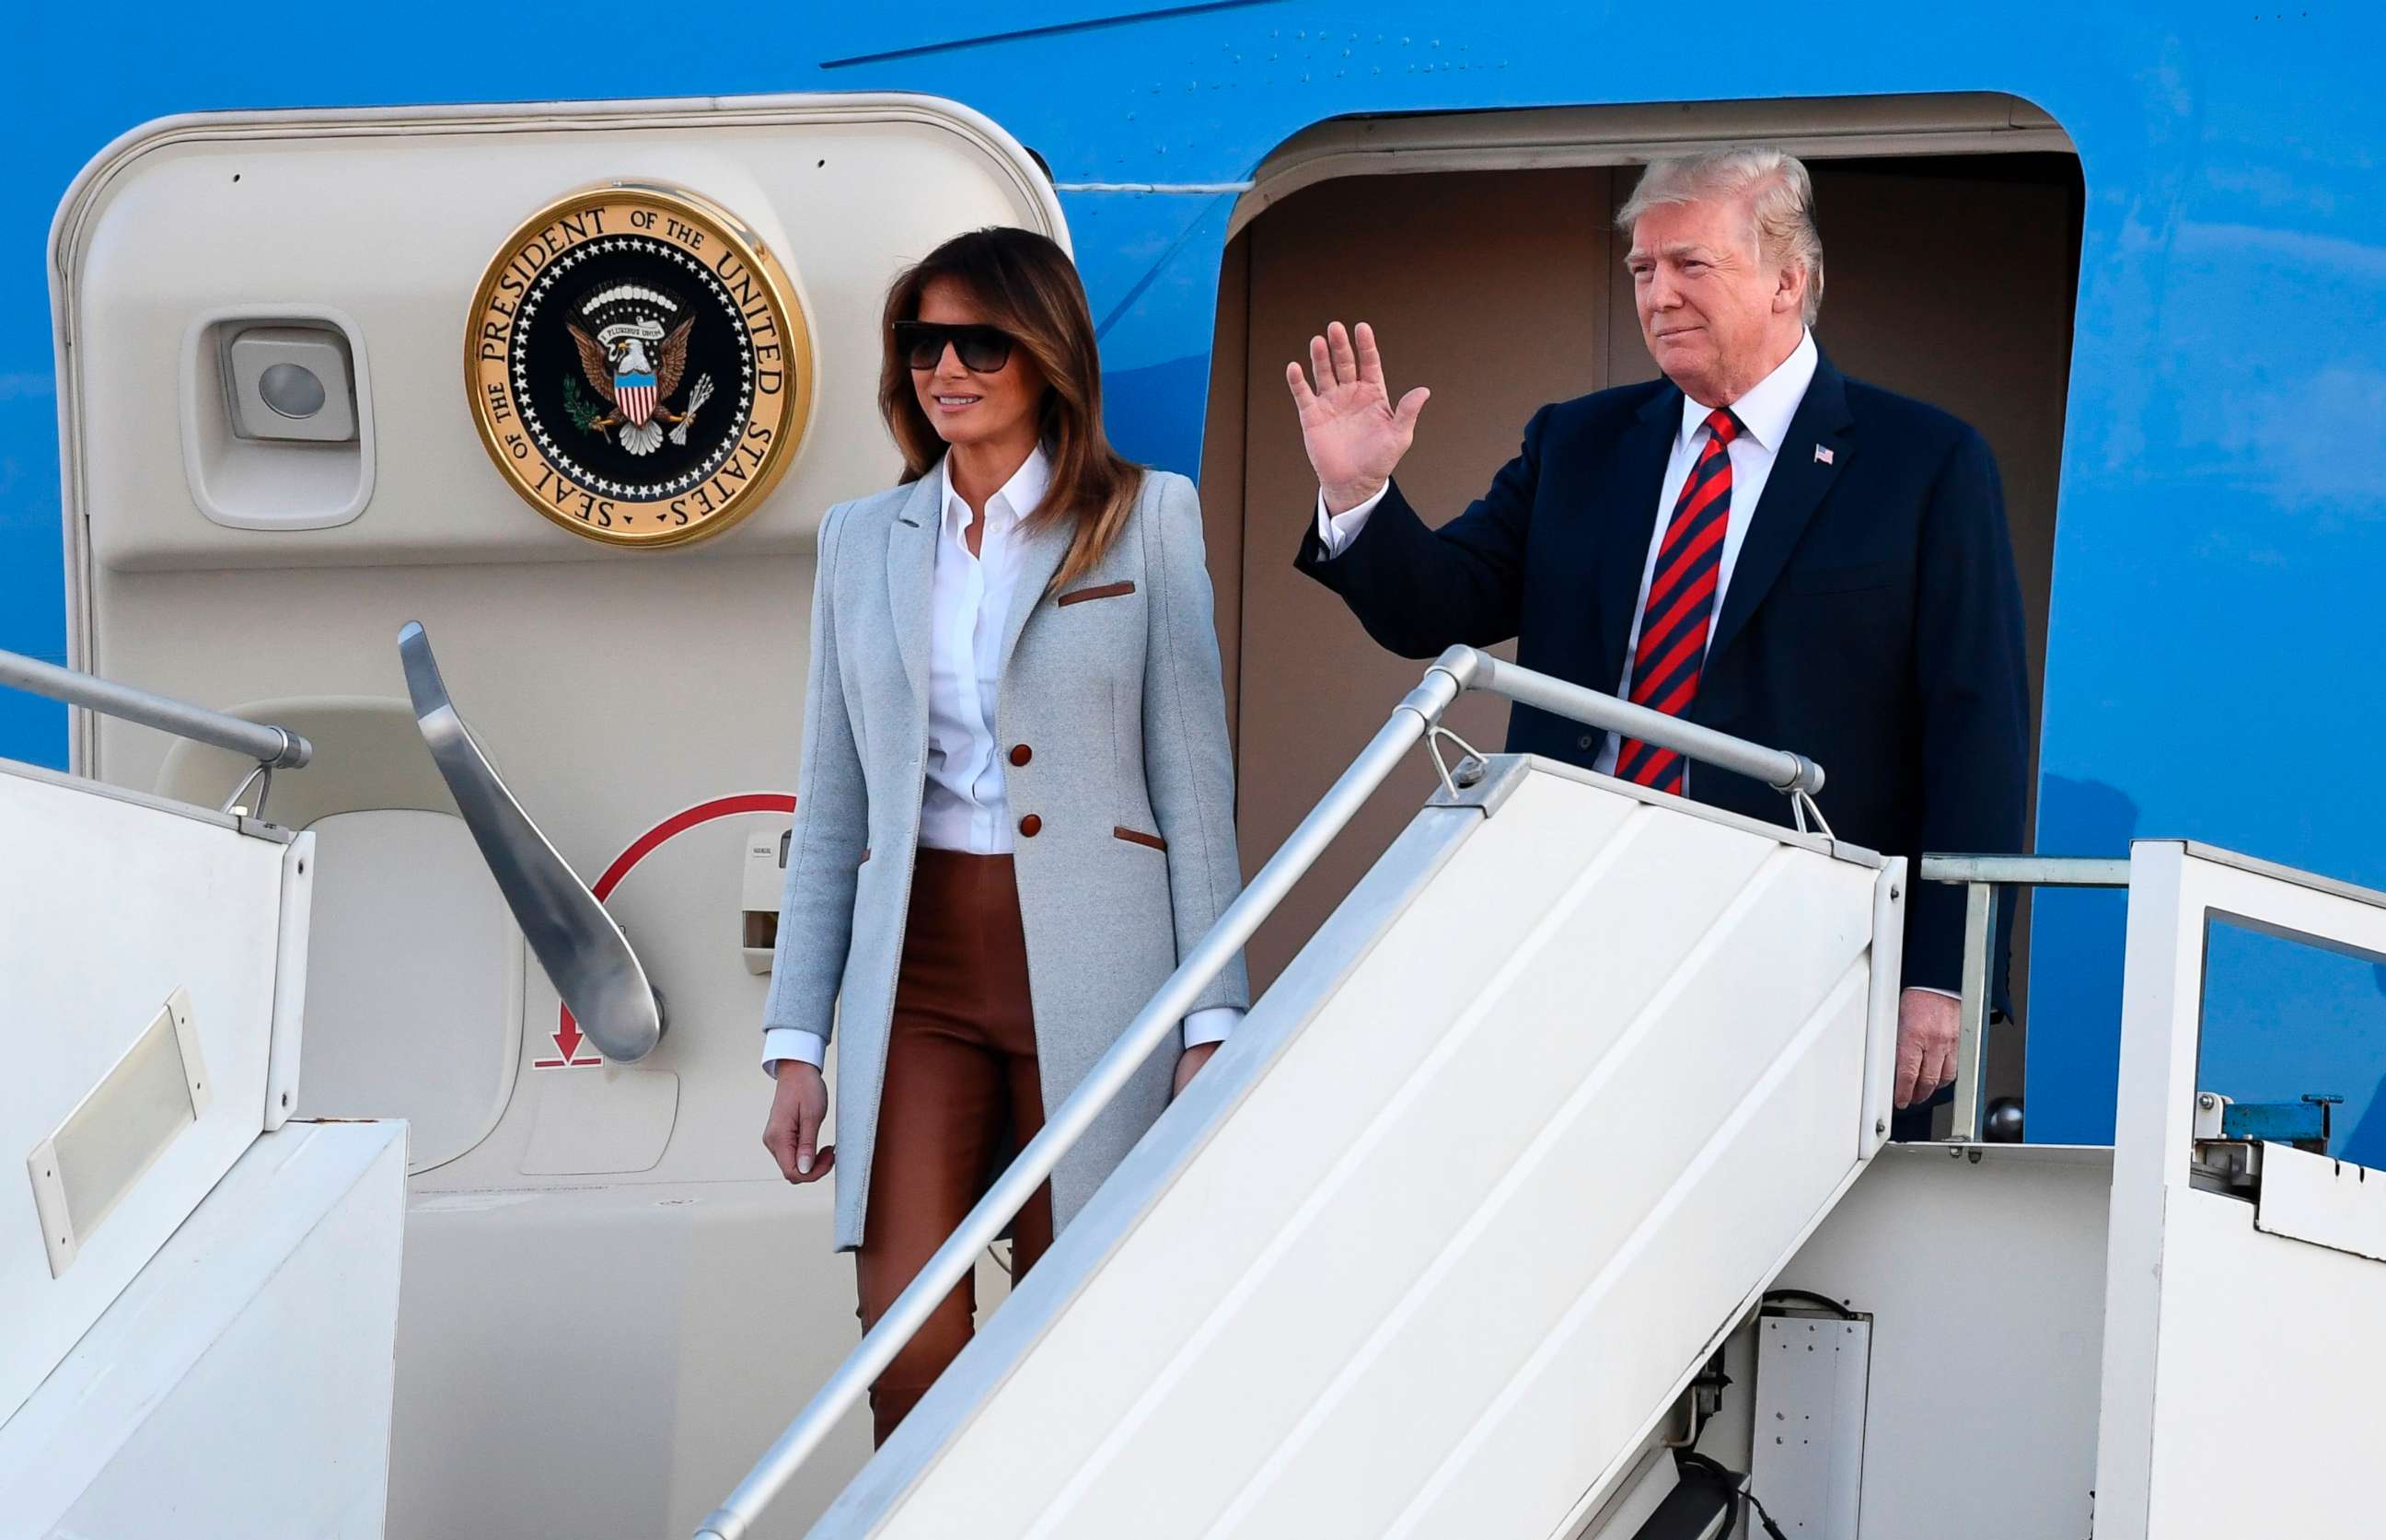 PHOTO: President Donald Trump and first lady Melania Trump disembark from Air Force One upon arrival at Helsinki-Vantaa Airport in Helsinki, July 15, 2018, on the eve of a summit in Helsinki between the President and his Russian counterpart.